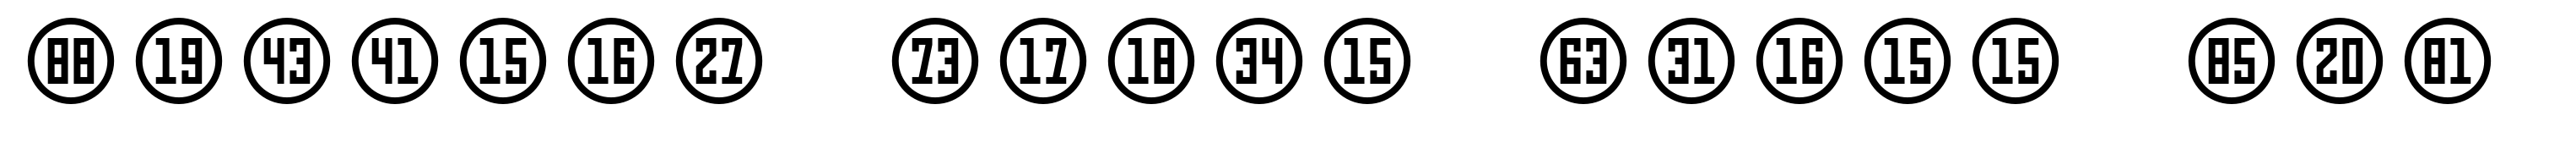 Numbers Style Three Circle Positive